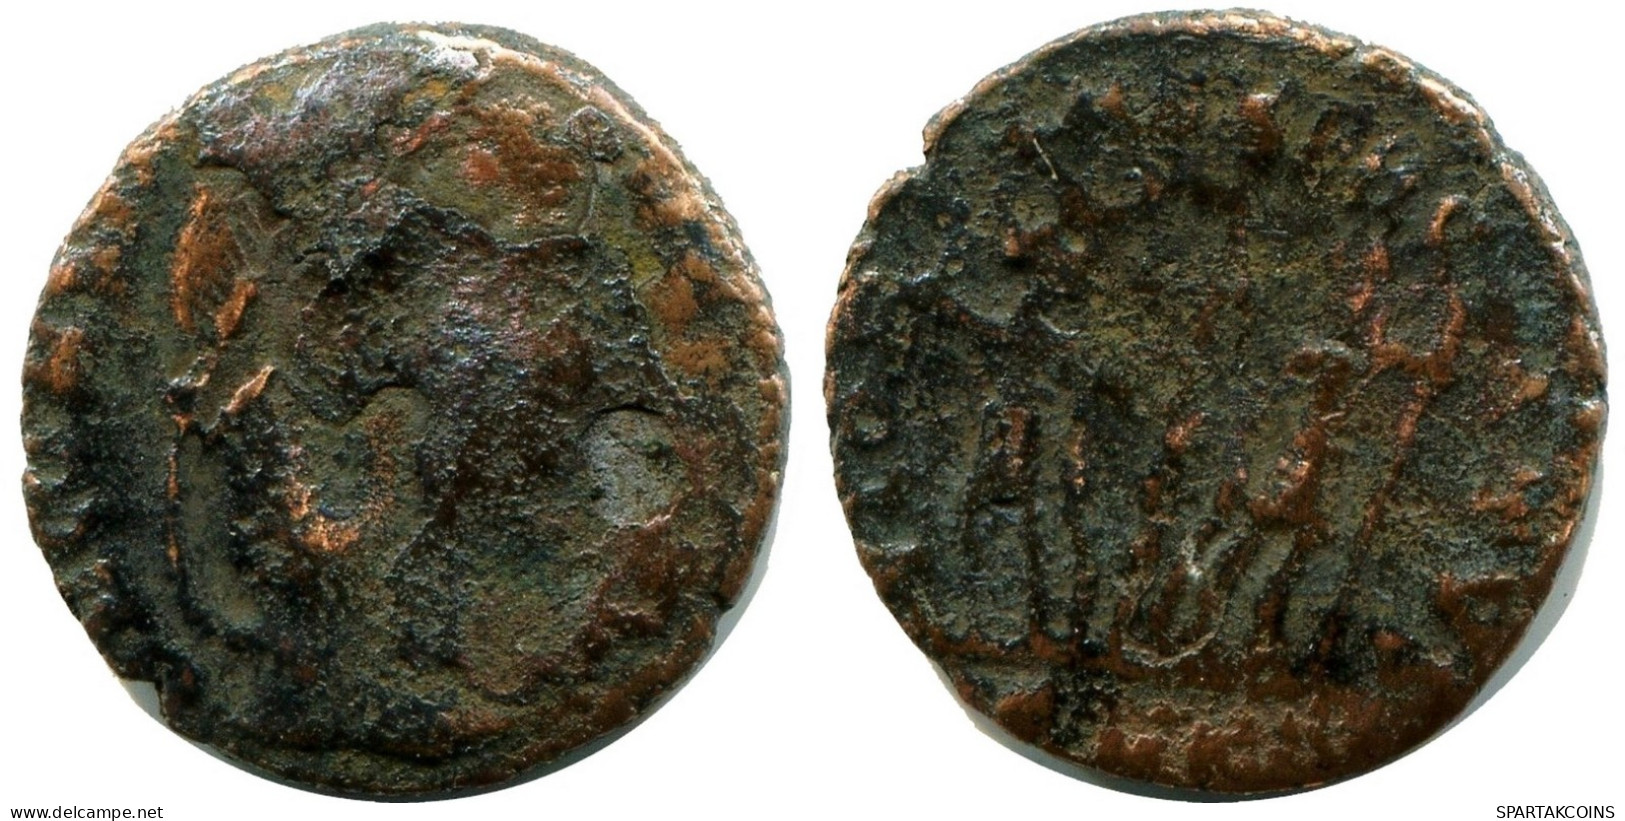 CONSTANS MINTED IN CYZICUS FROM THE ROYAL ONTARIO MUSEUM #ANC11659.14.F.A - El Imperio Christiano (307 / 363)